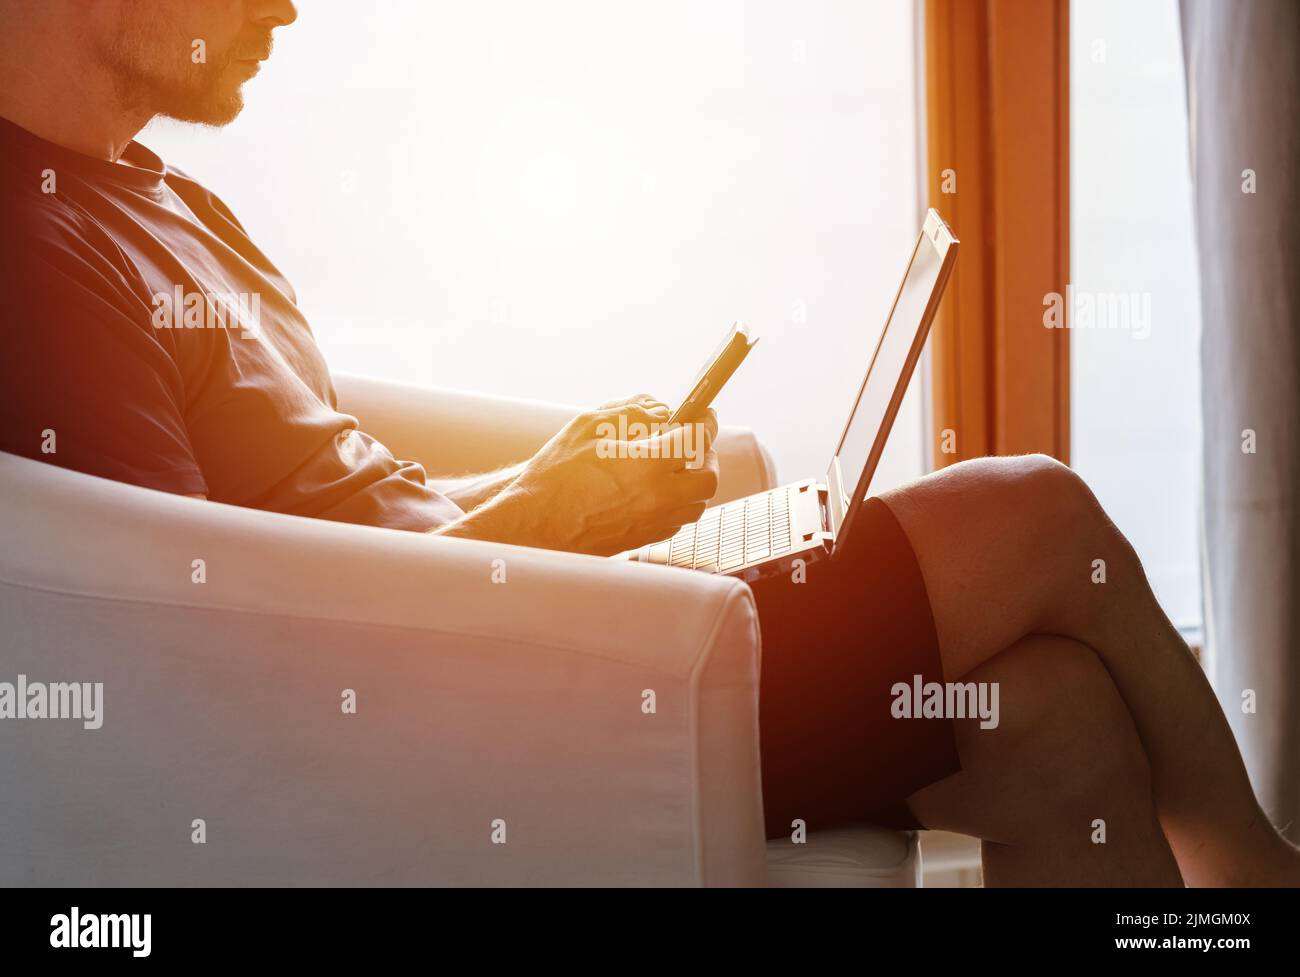 Working from home on the laptop. Wearing casual comfort outfit in home office. Stock Photo